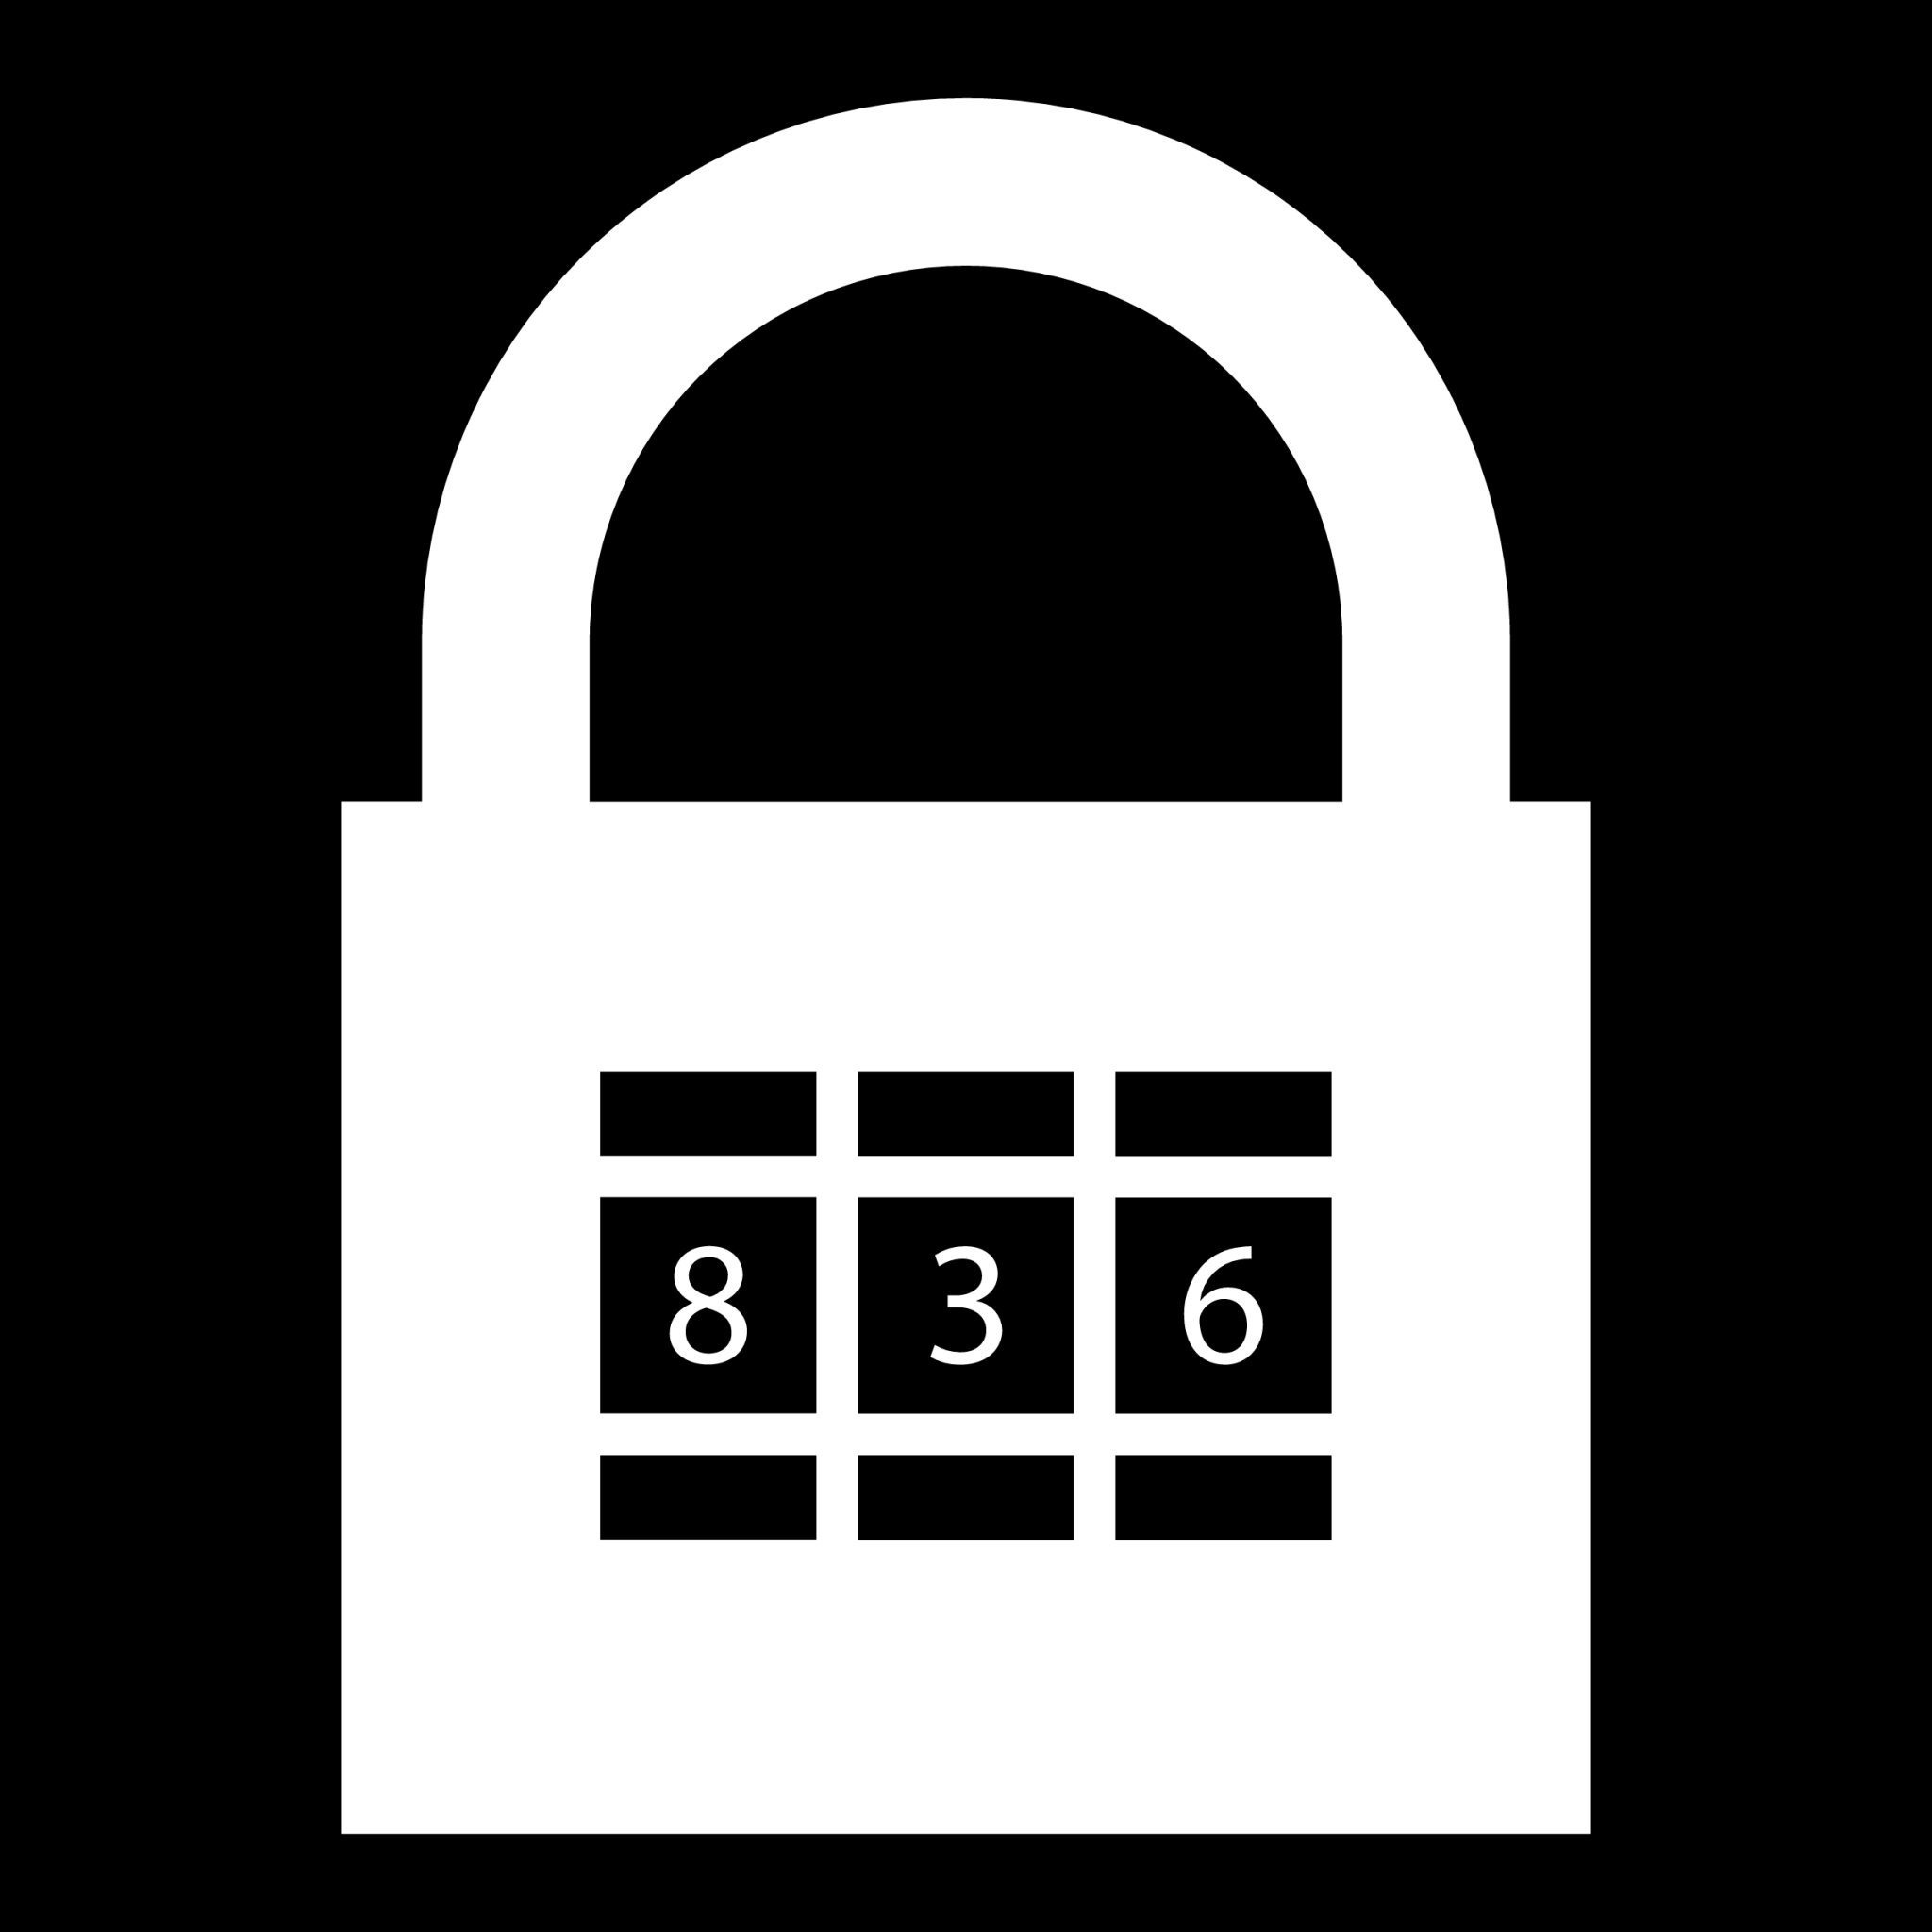 https://static-00.iconduck.com/assets.00/combination-lock-icon-2048x2048-orgfyr9t.png